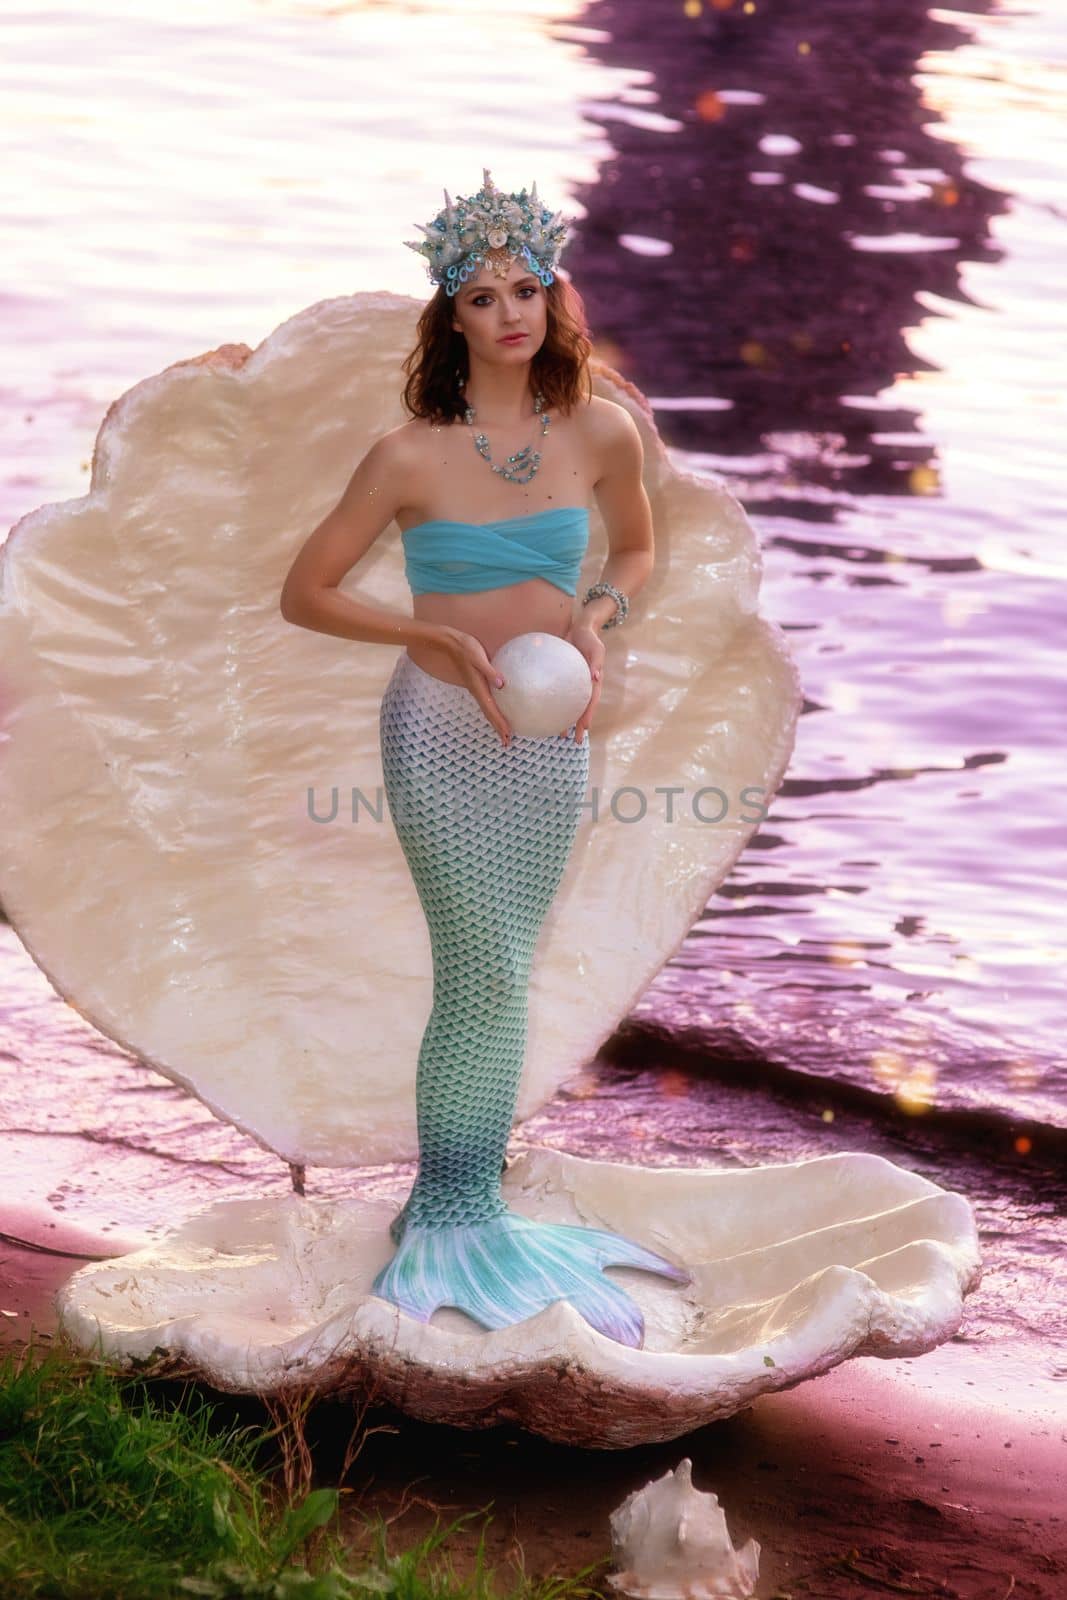 A beautiful mermaid girl stands in a large white shell by Zakharova